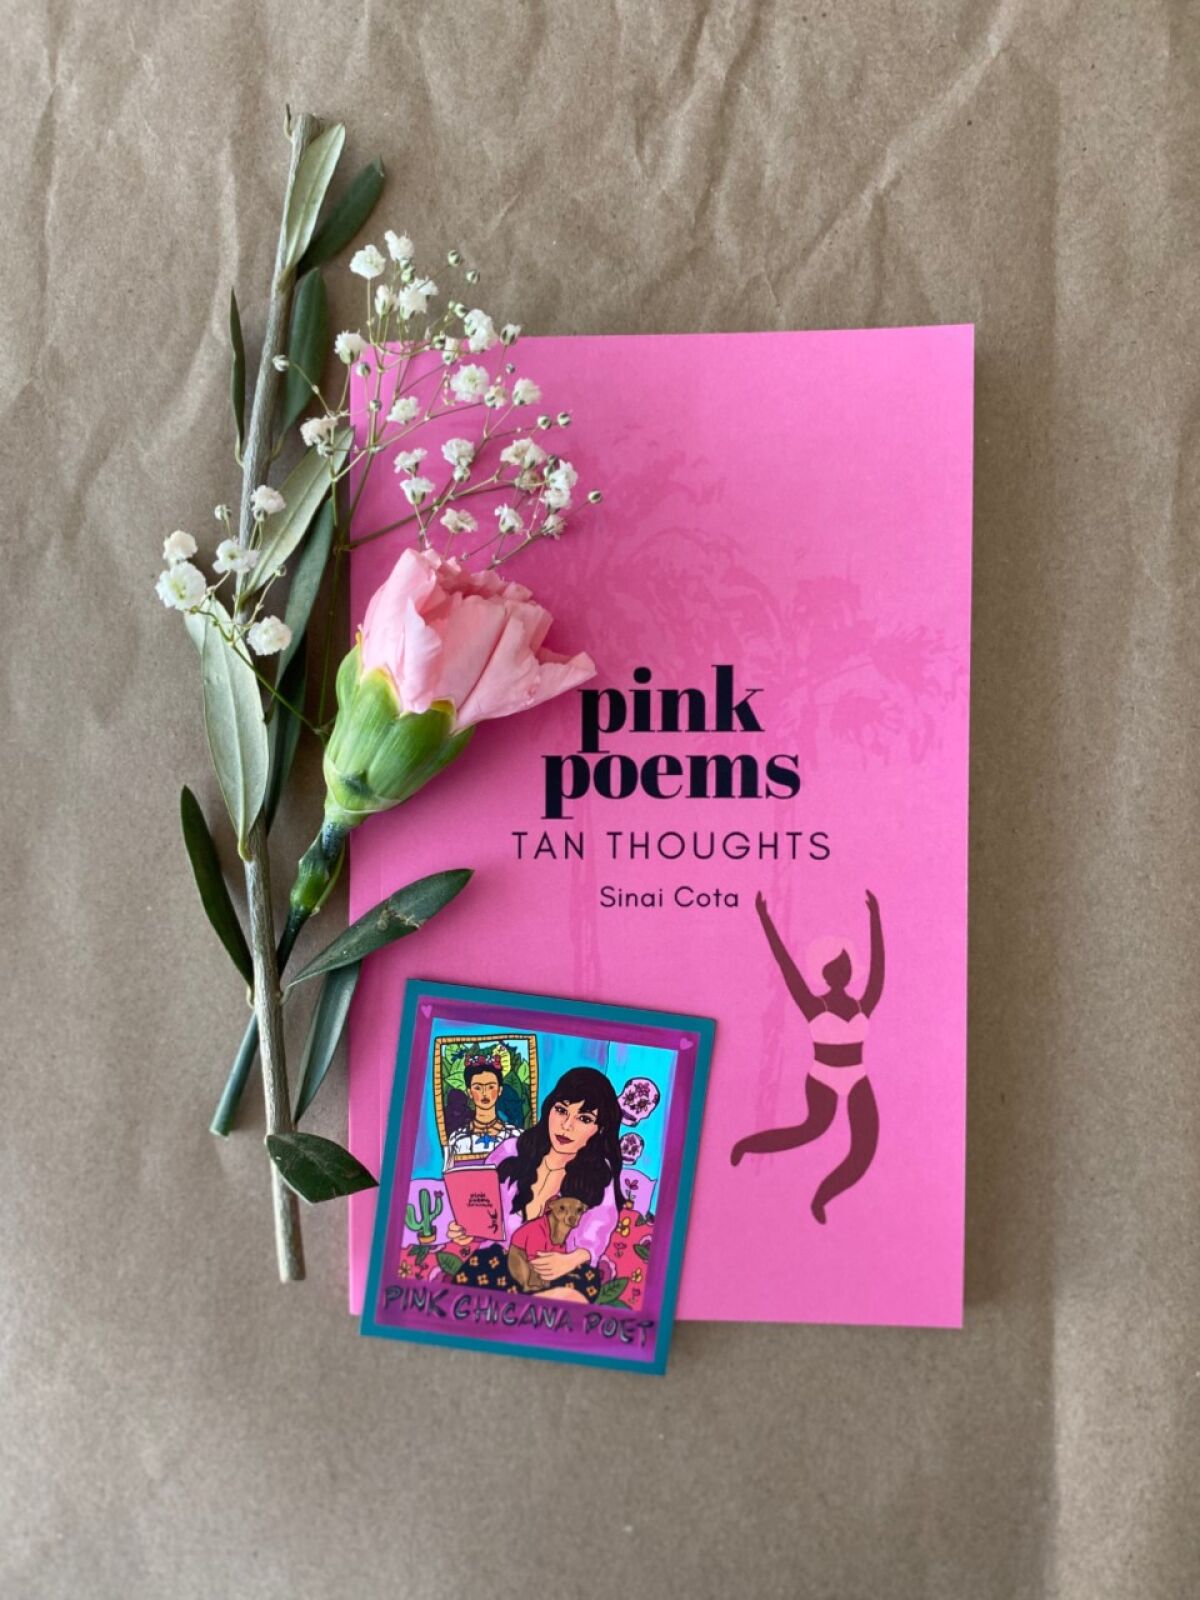 "Pink Poems Tan Thoughts" is a collection of short stories 